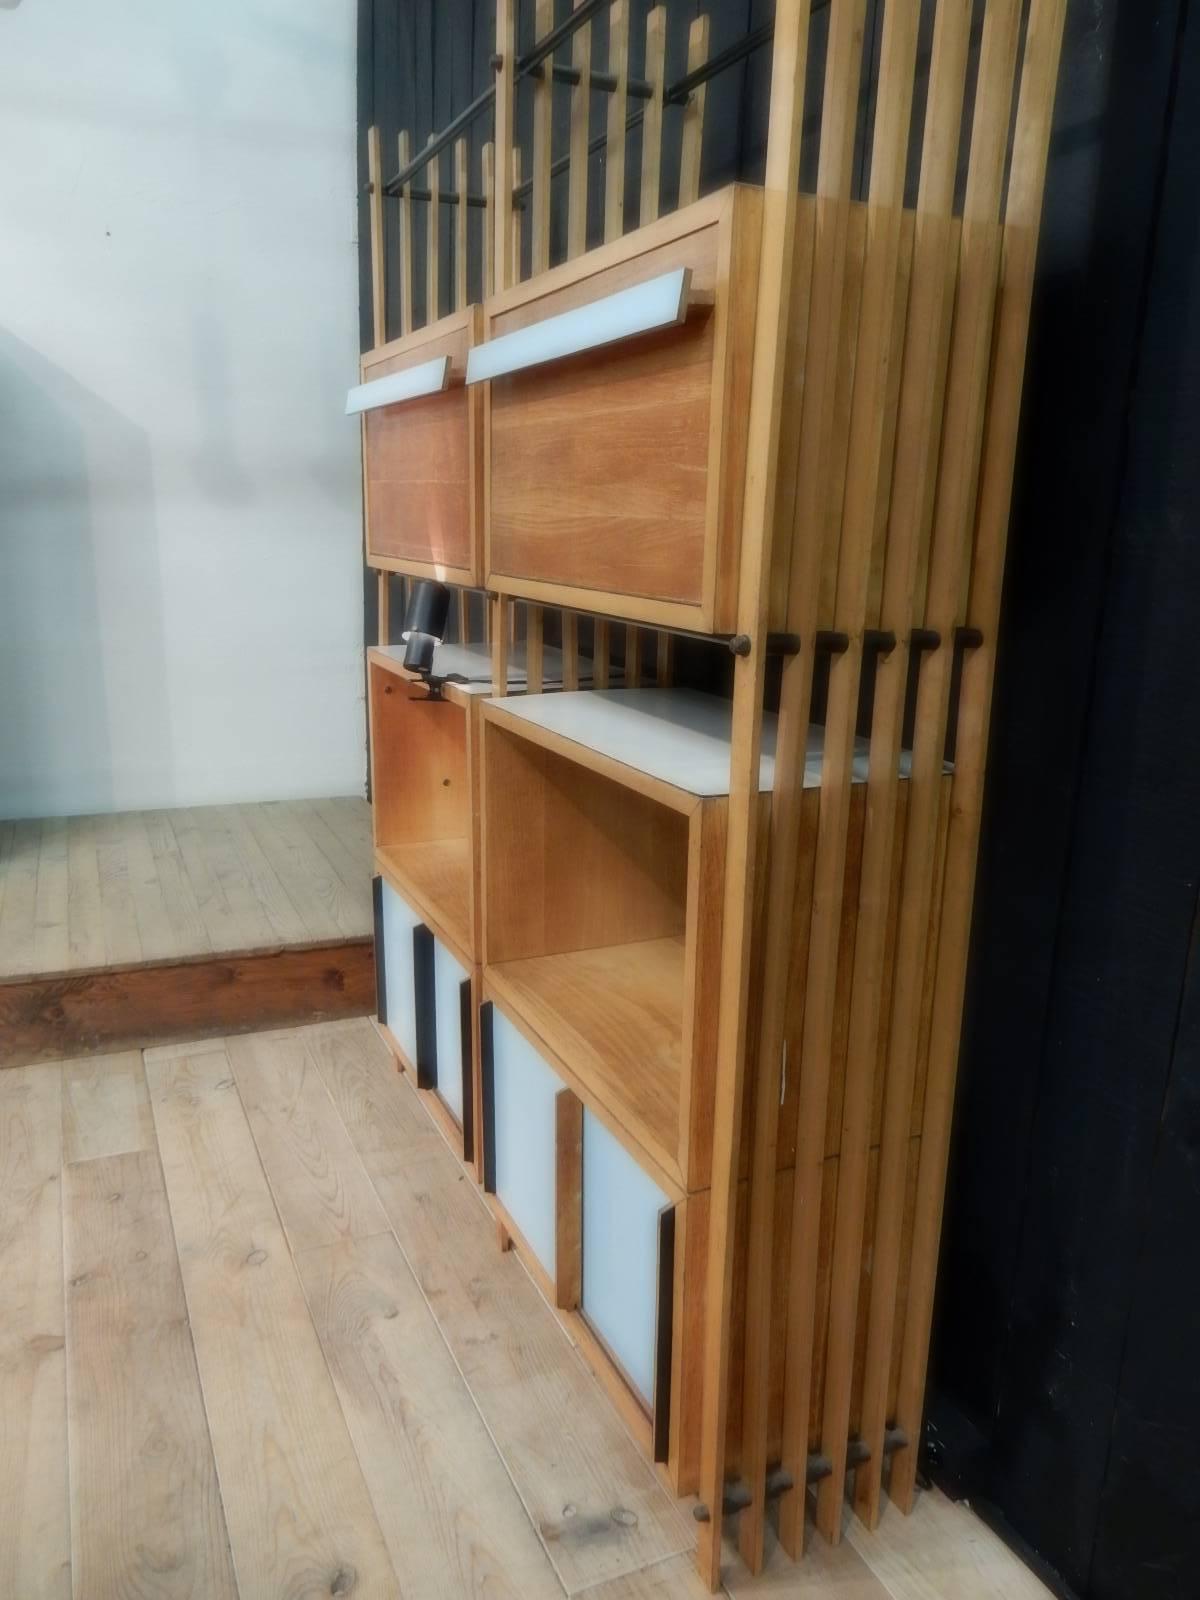 An 1950 Italian bookshelves made of sycamore and original blue laminated wood.